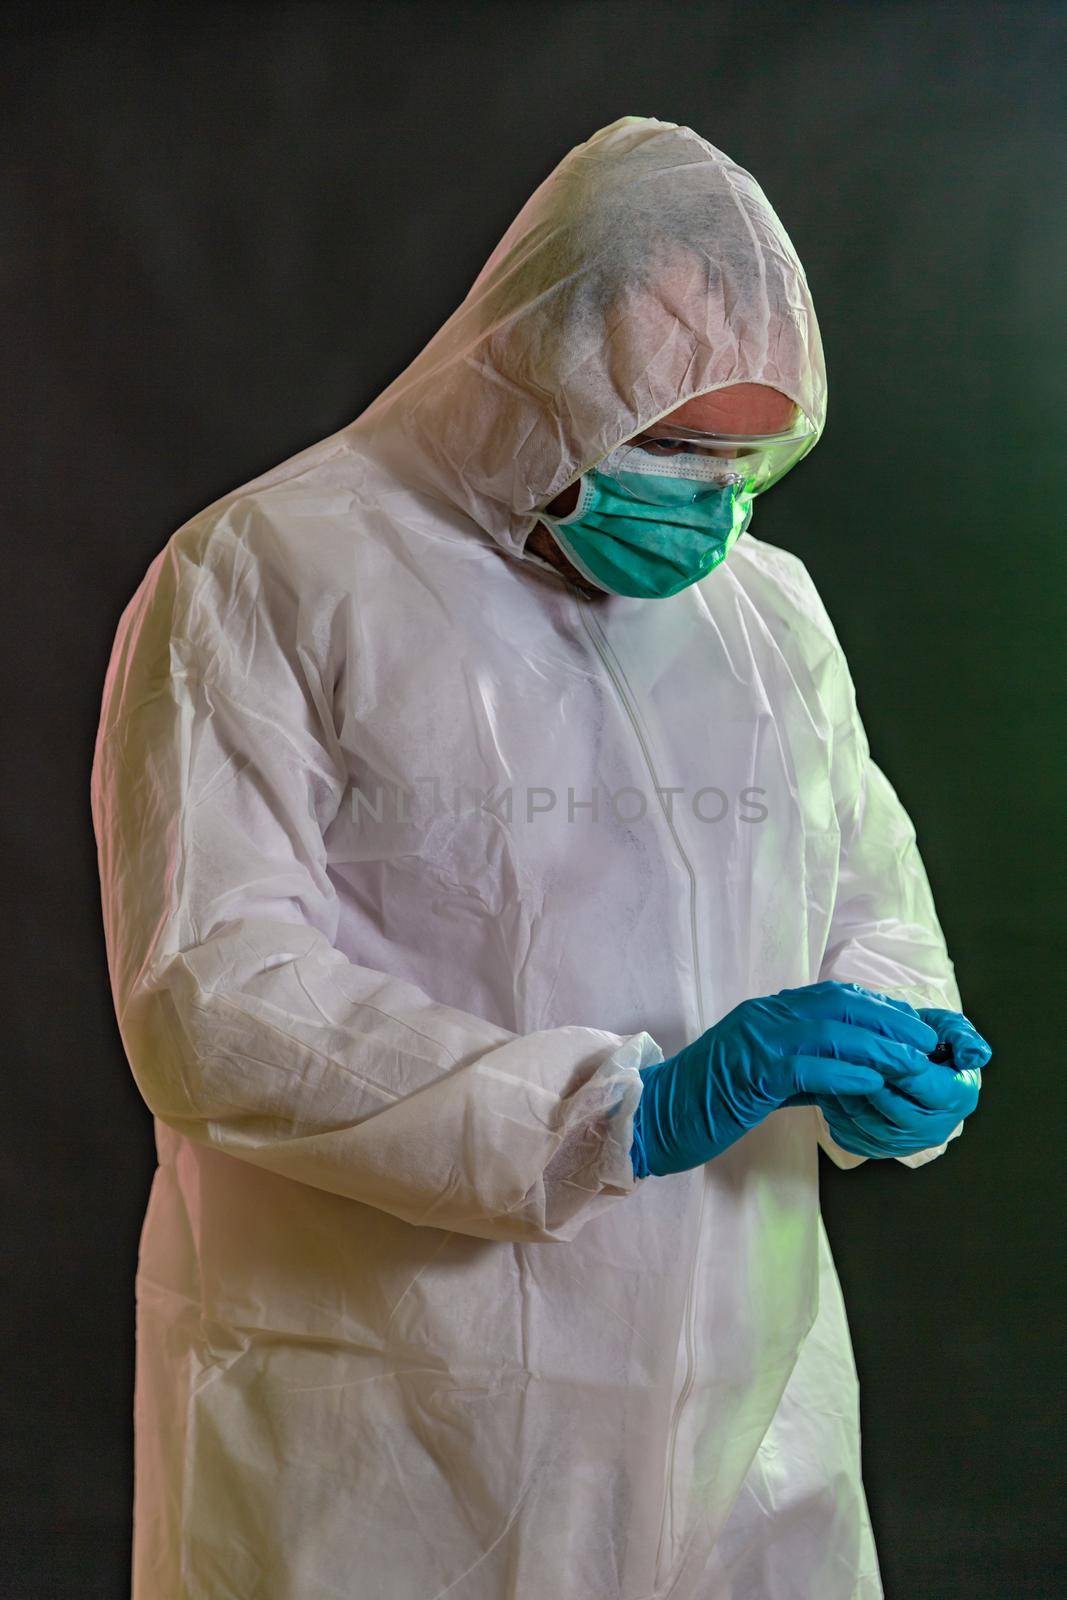 Man in chemical suit measures toxicity levels by imagesbykenny